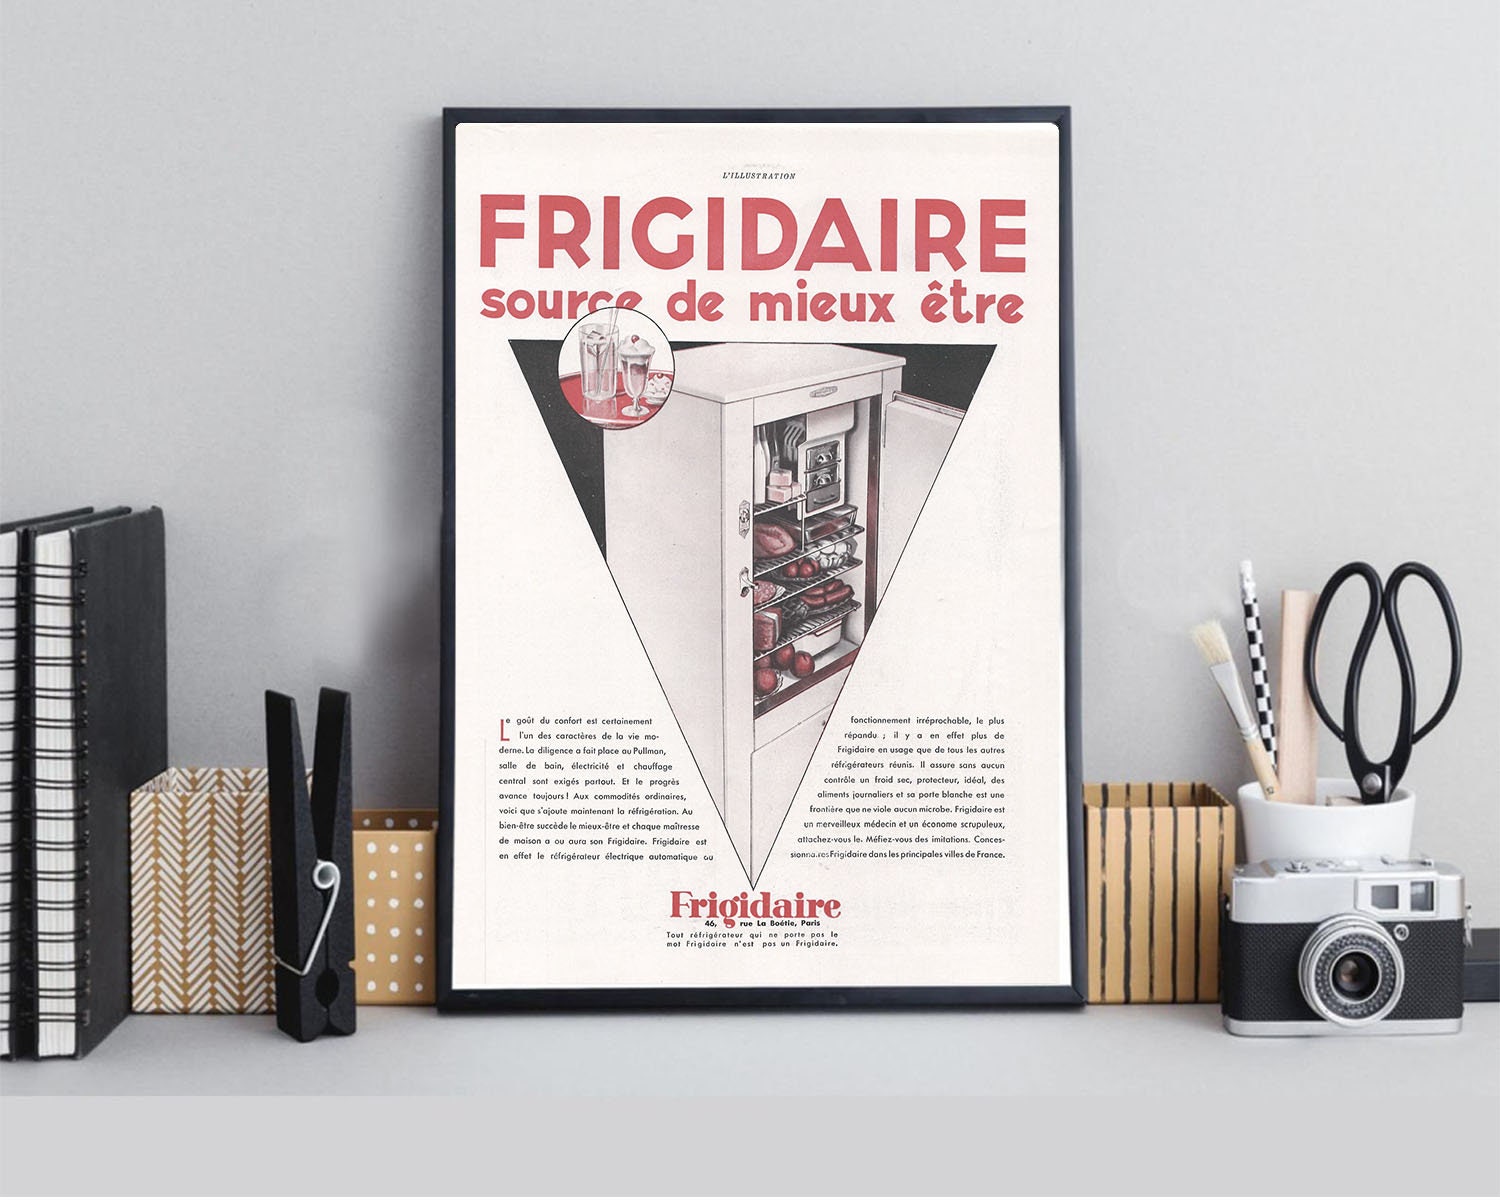 1930 Ad Frigidaire Hydrator Cold Food Container Vegetable